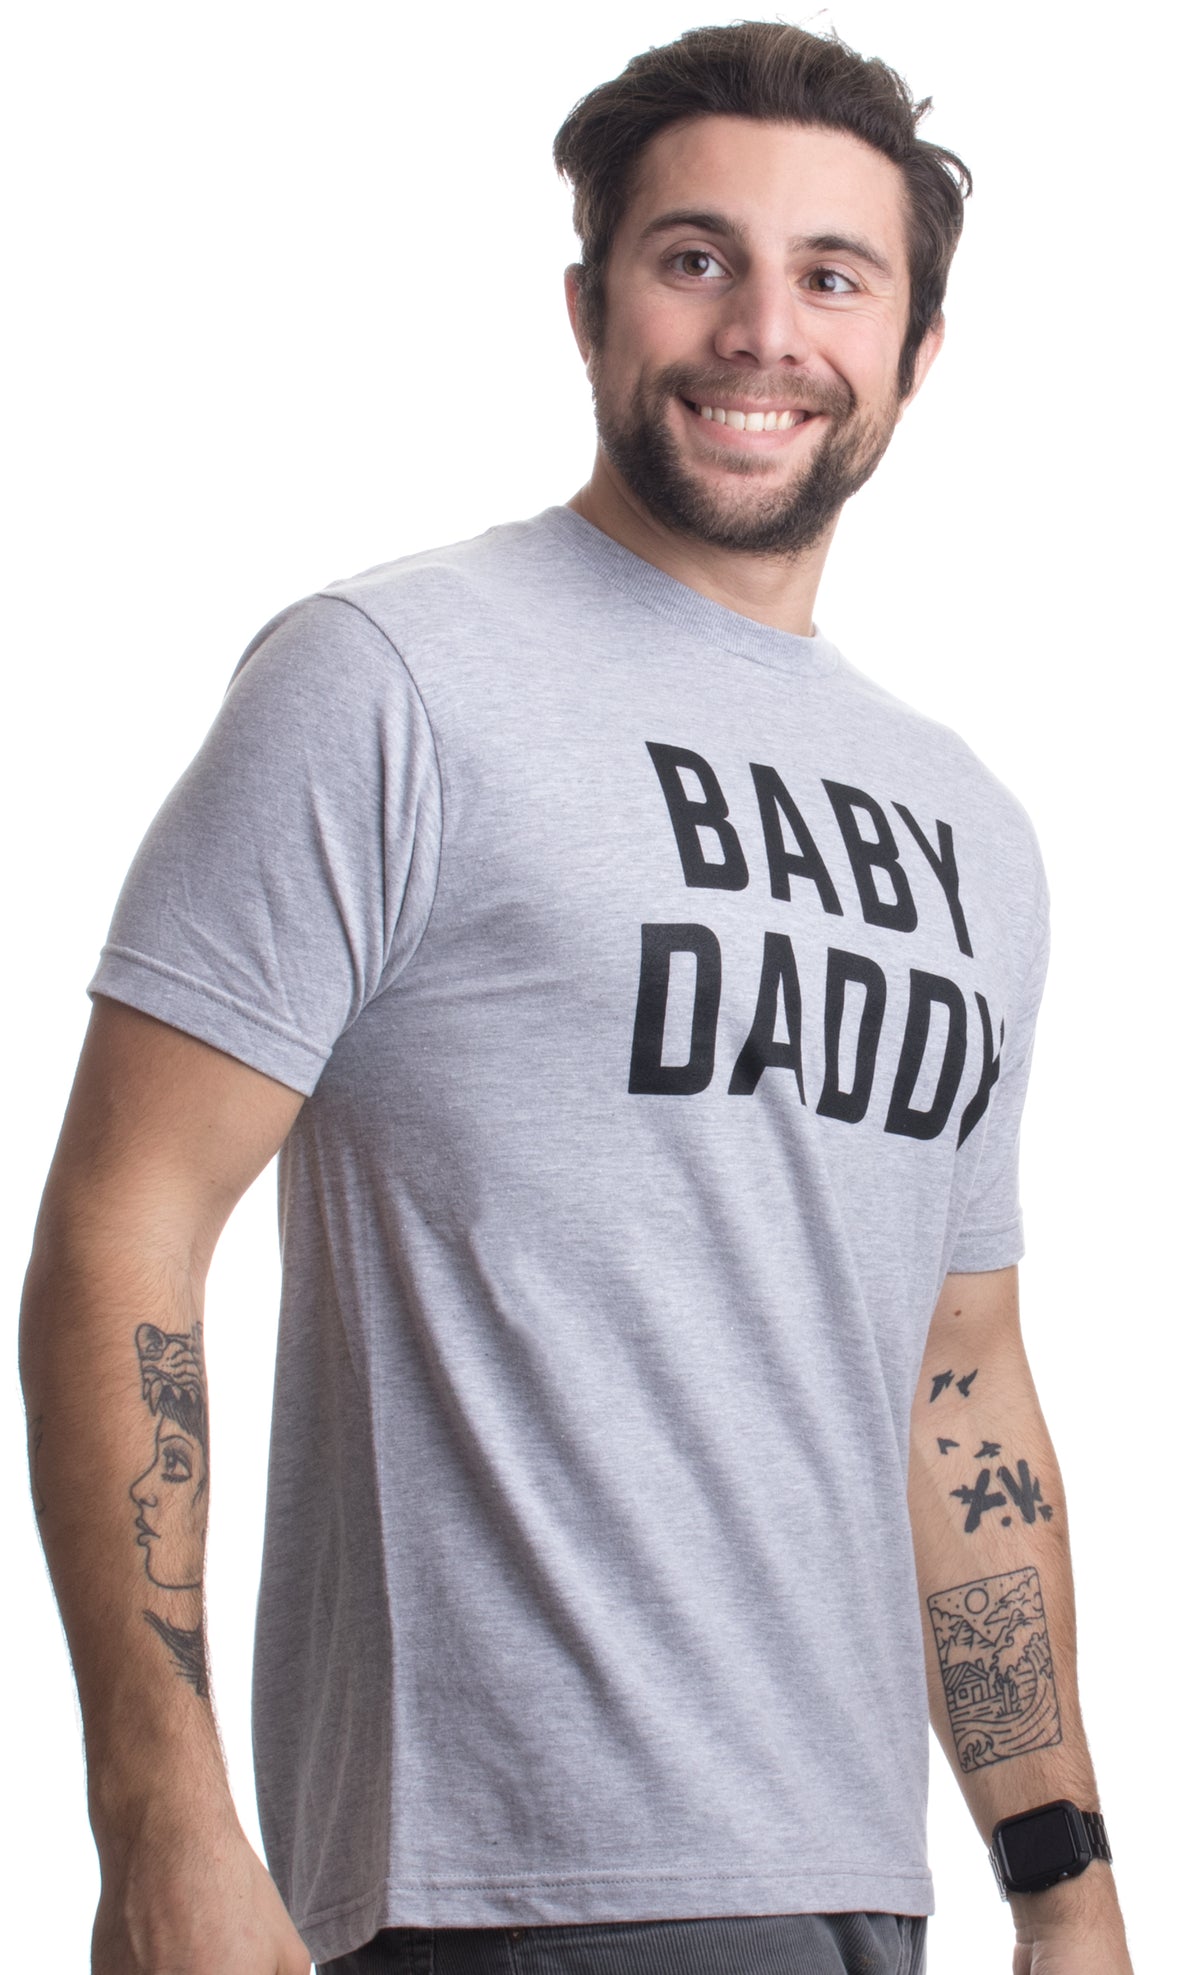 Baby Daddy - Funny New Father, Father's Day Dad Gift Humor T-shirt for Men